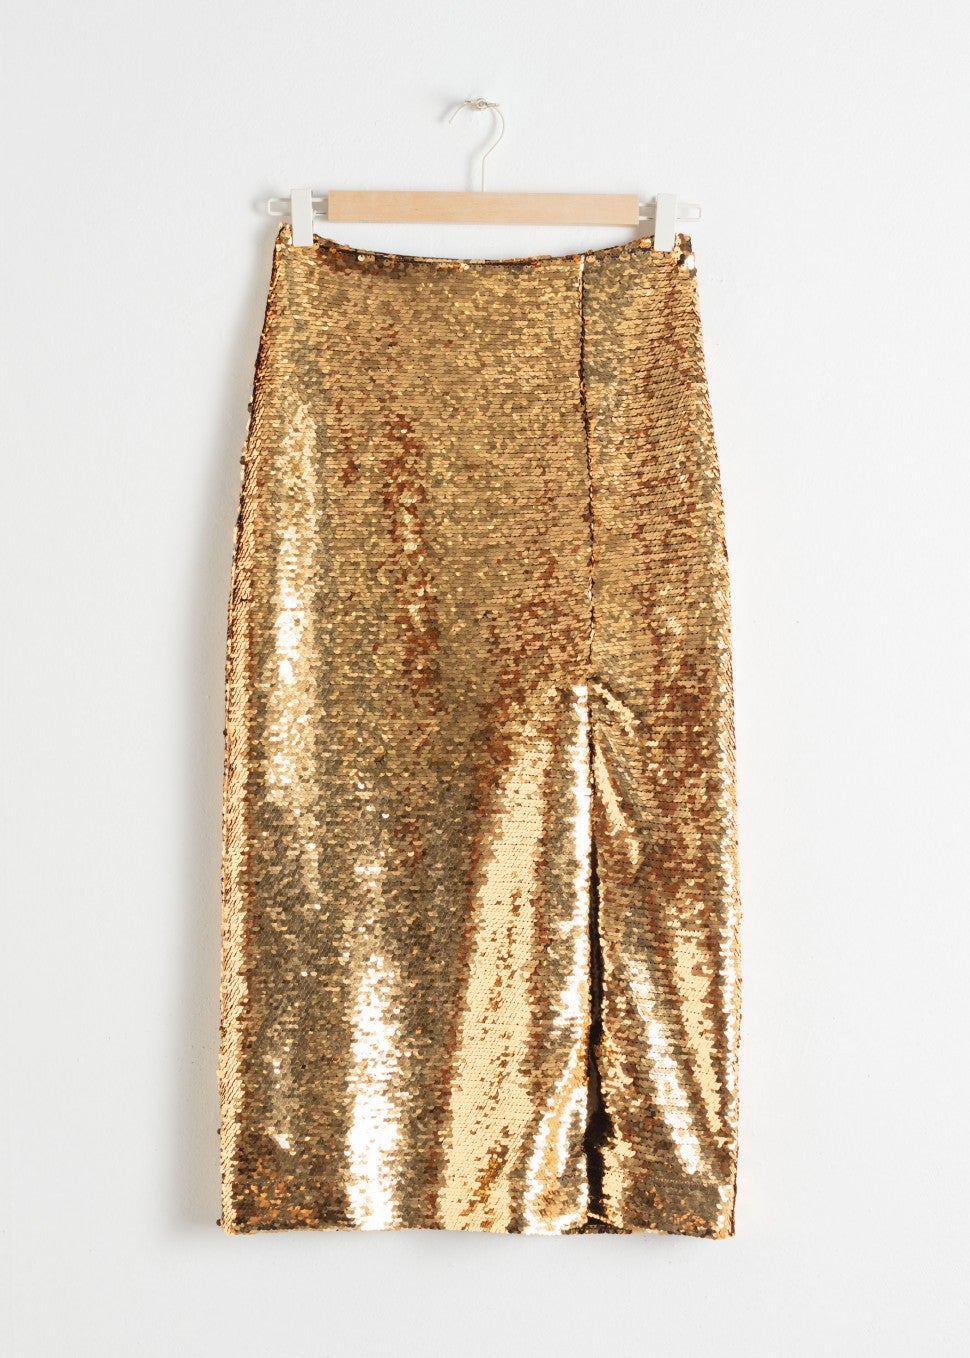 & Other Stories gold skirt